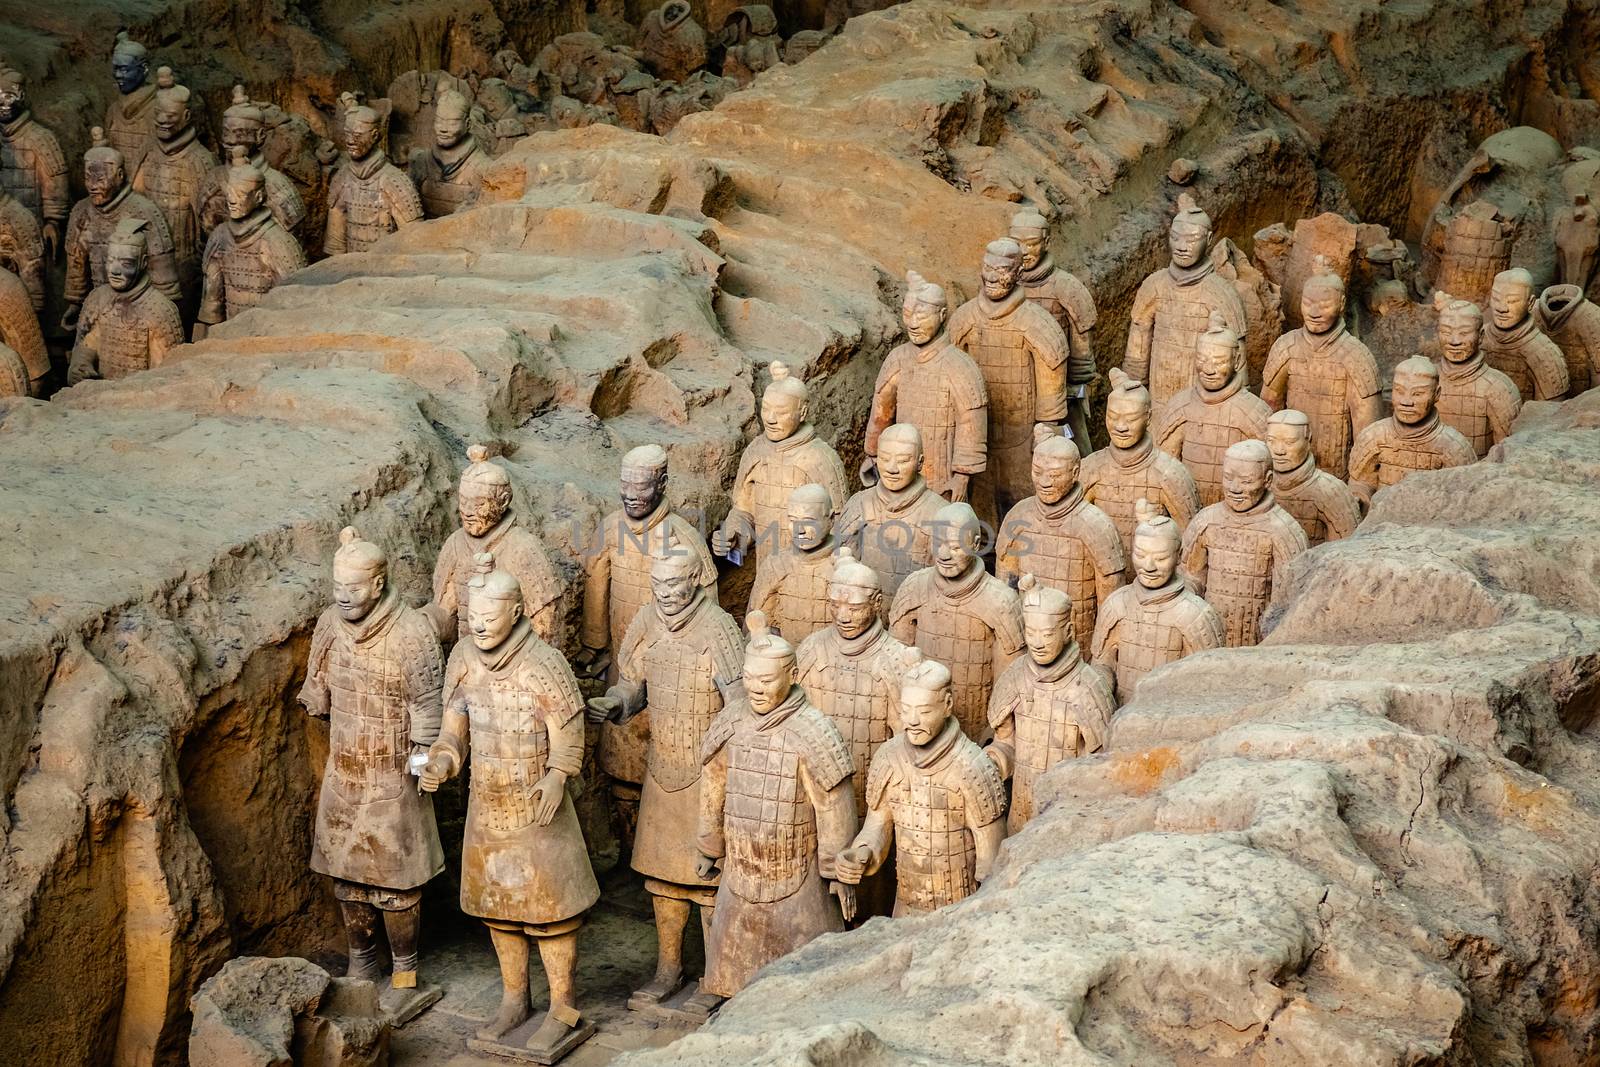 Excavated sculptures statues of the terracota army soldiers of Q by ambeon